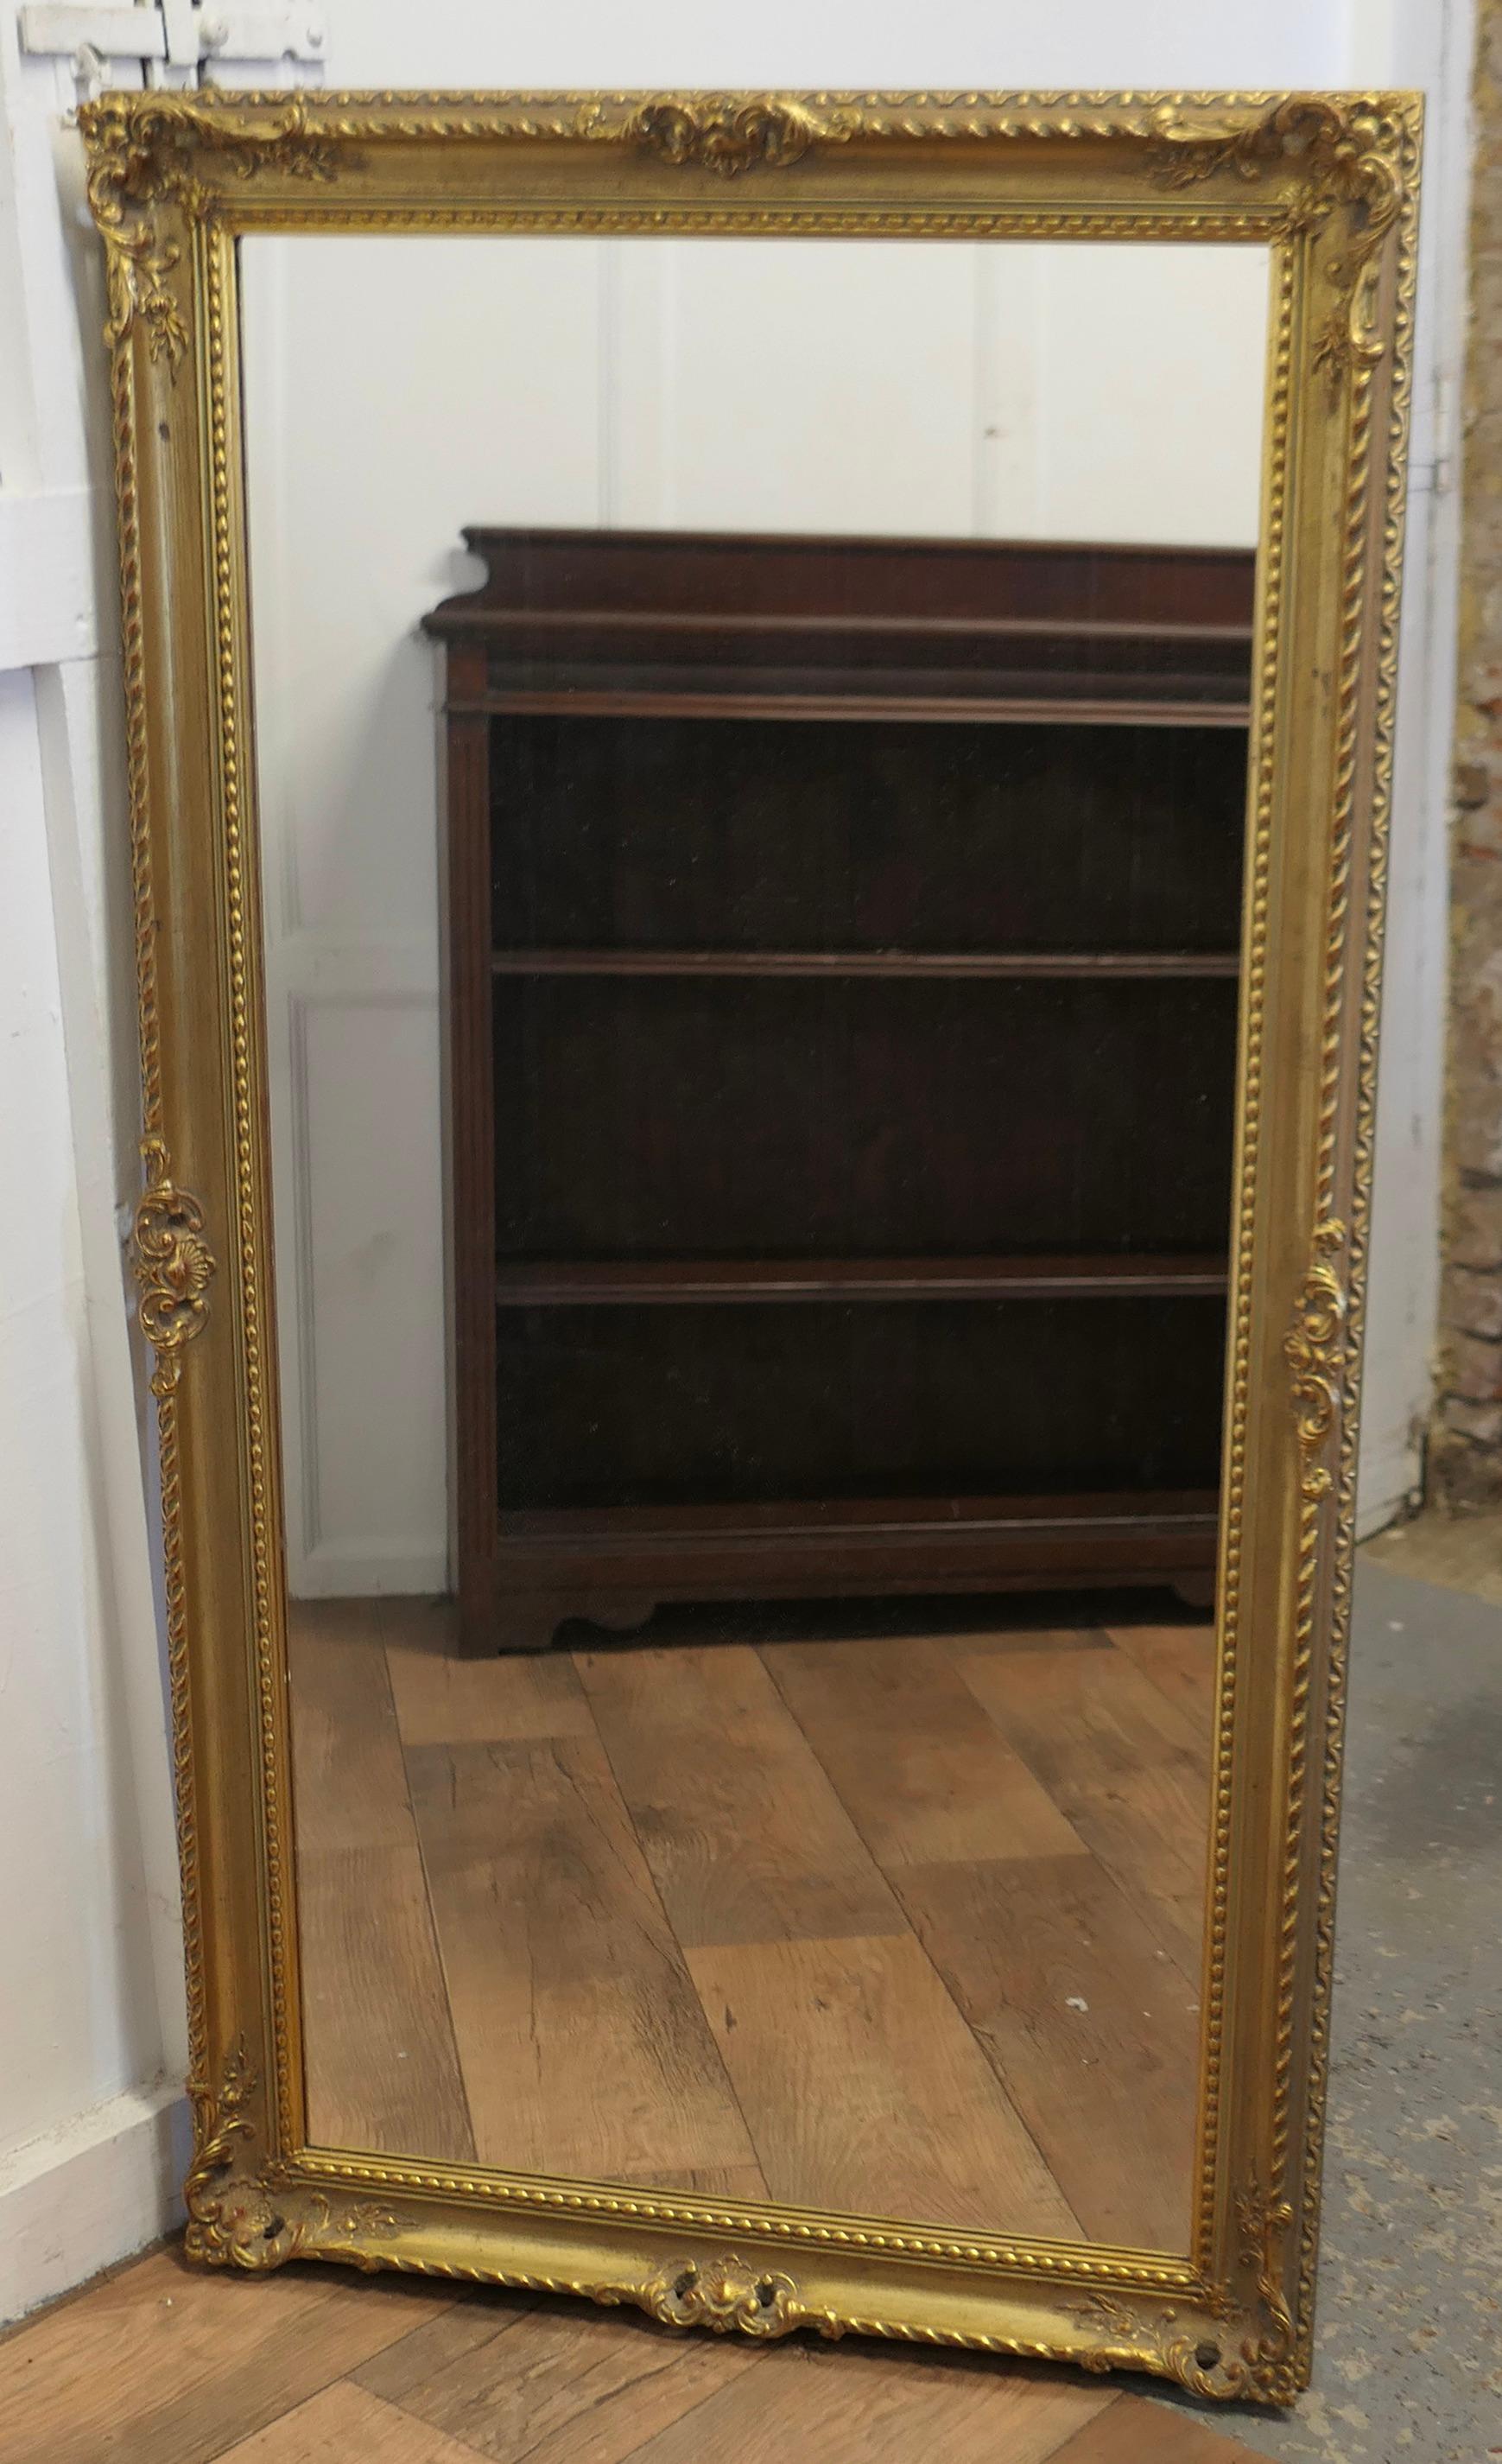 A Long Decorative Gilt Wall Mirror

A delightful piece, the mirror has a 3” wide pierced Gilt Frame, the mirror has a new looking glass
A good decorative piece in very attractive condition and could be hung either Portrait or Landscape
The frame is